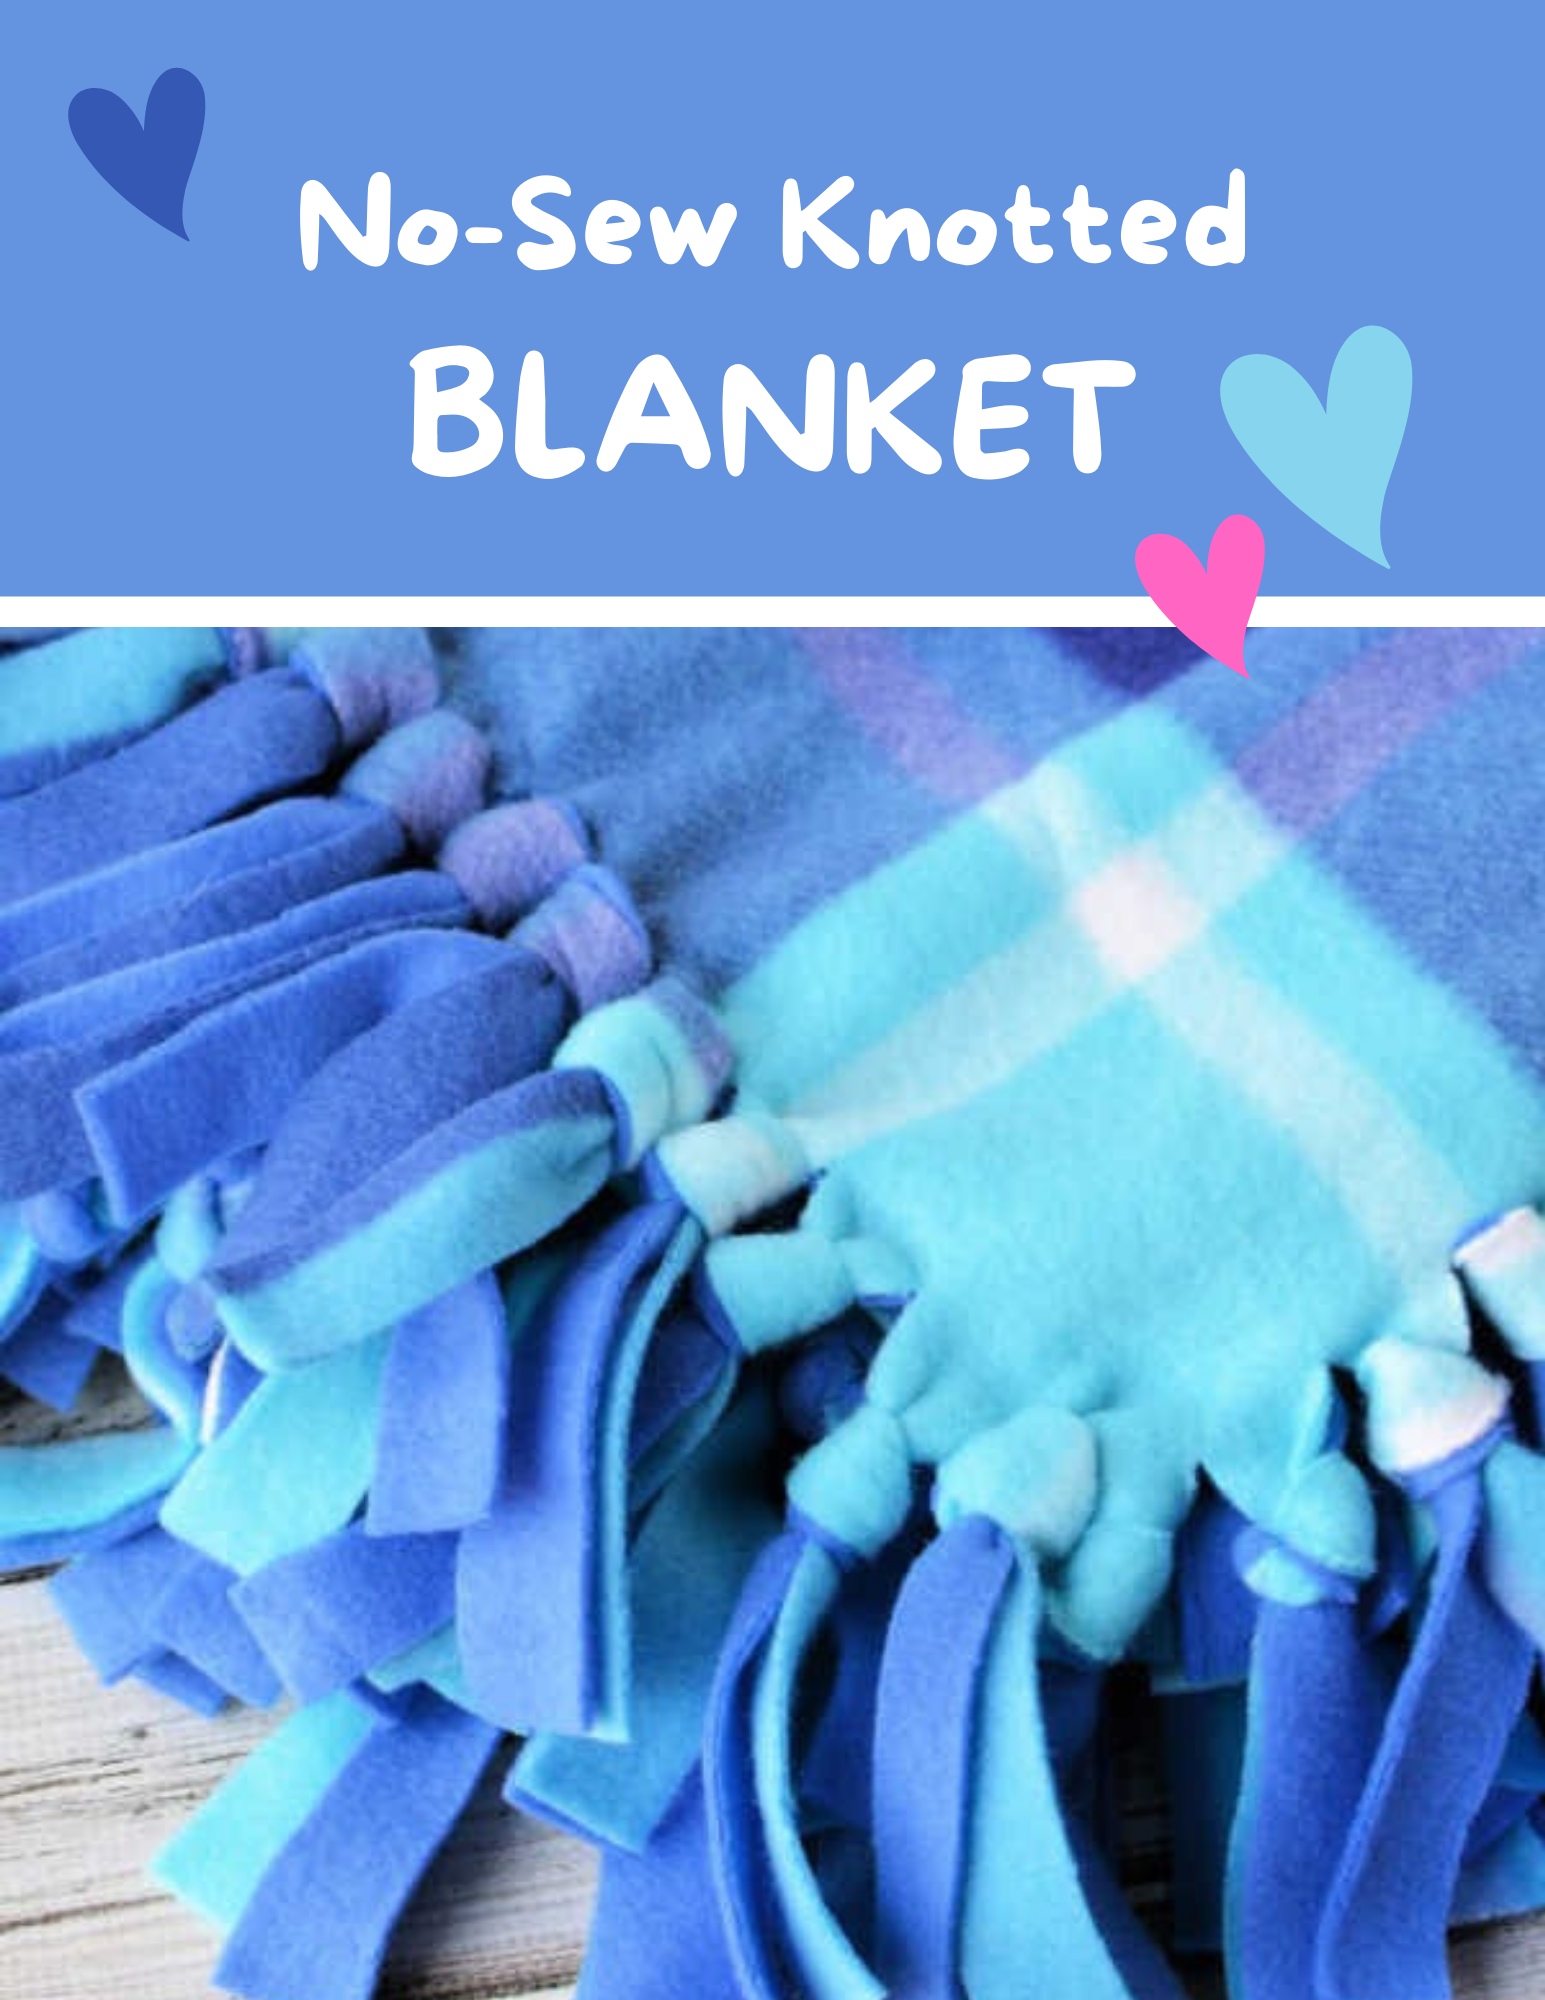 No-Sew Knotted Blanket